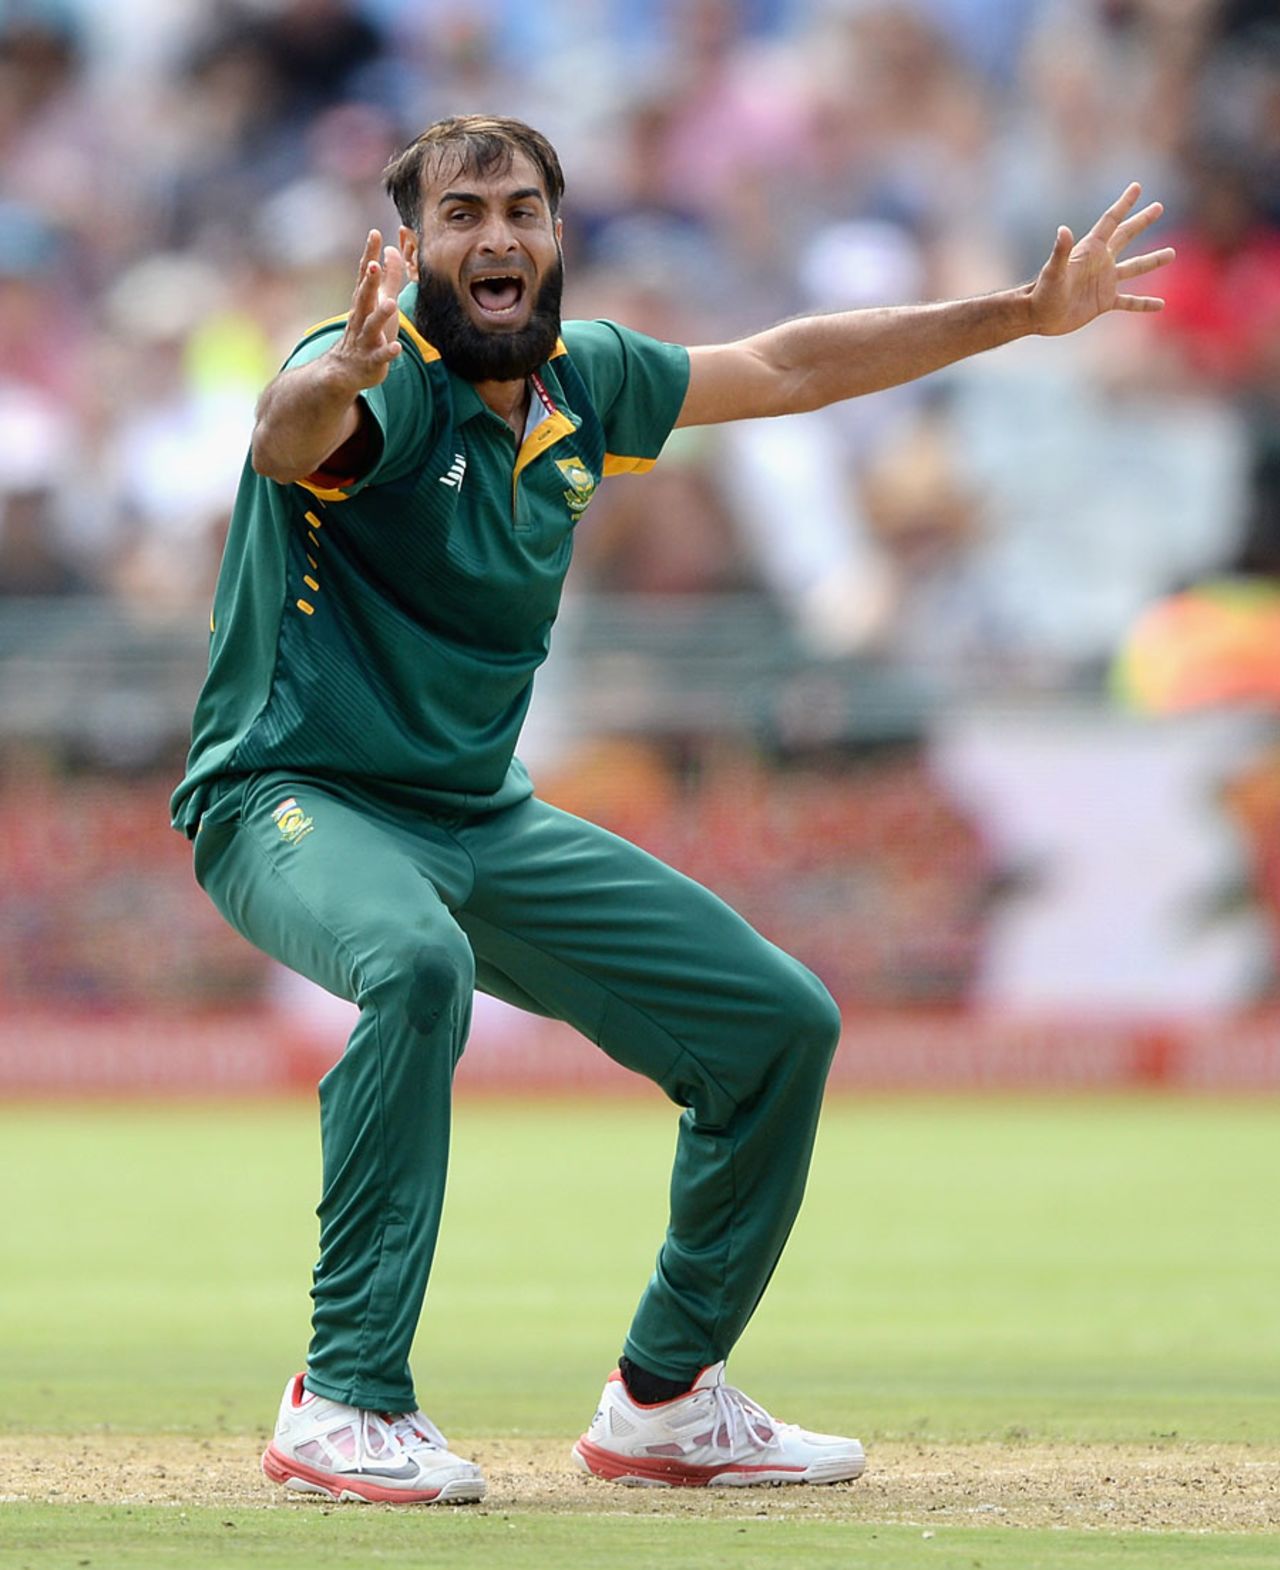 Imran Tahir pleads for the wicket of Joe Root, South Africa v England, 5th ODI, Cape Town, February 14, 2016